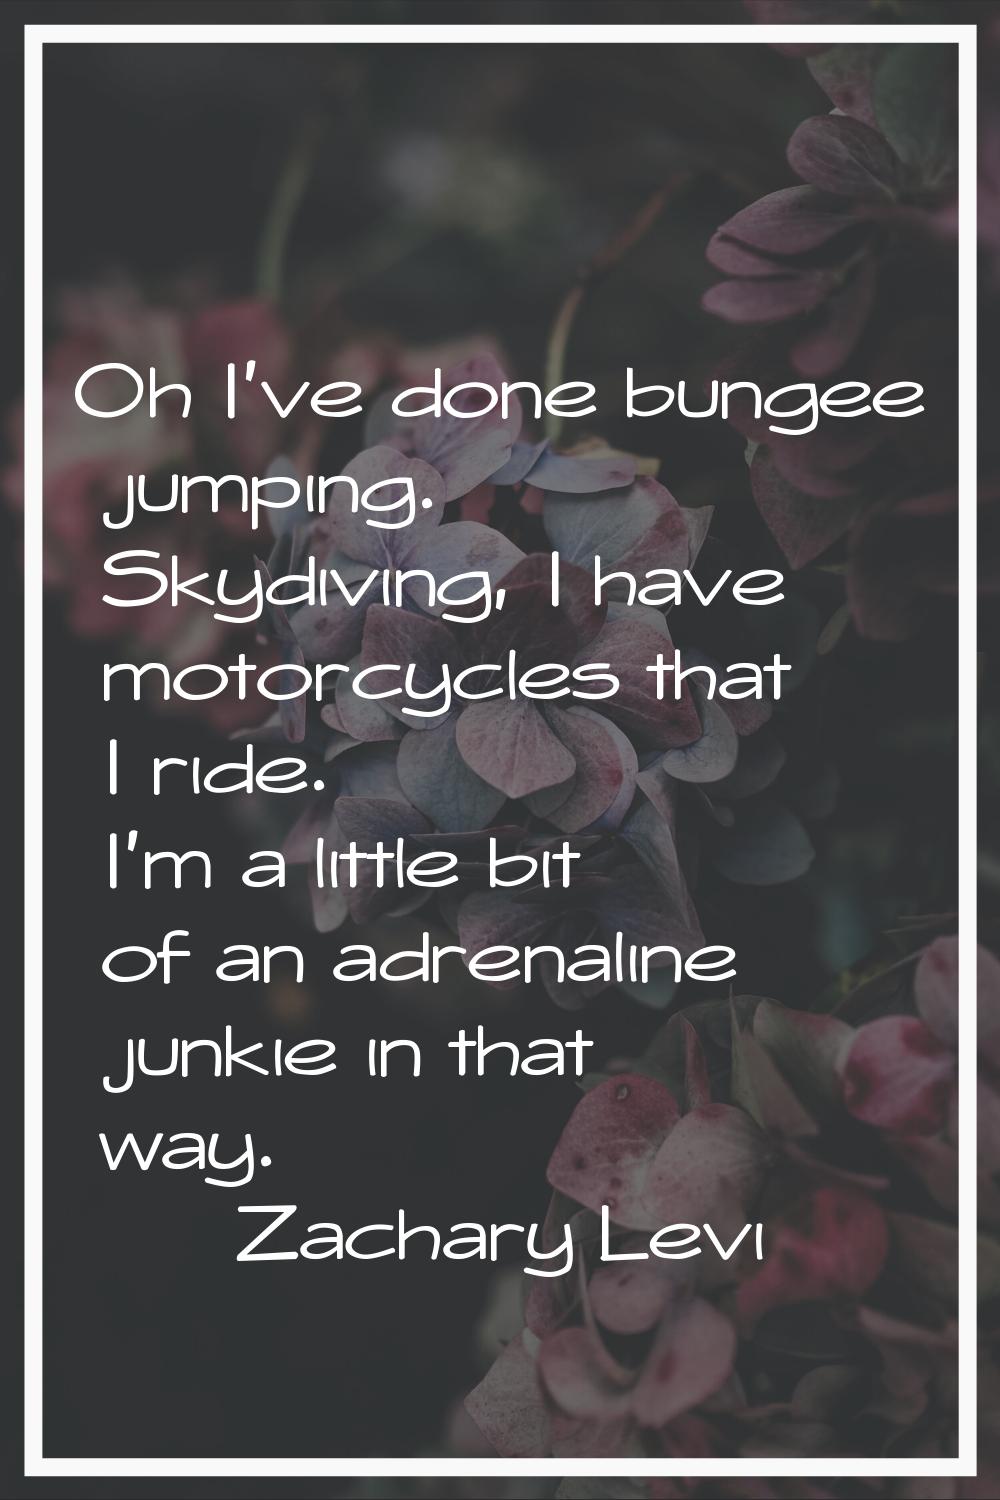 Oh I've done bungee jumping. Skydiving, I have motorcycles that I ride. I'm a little bit of an adre